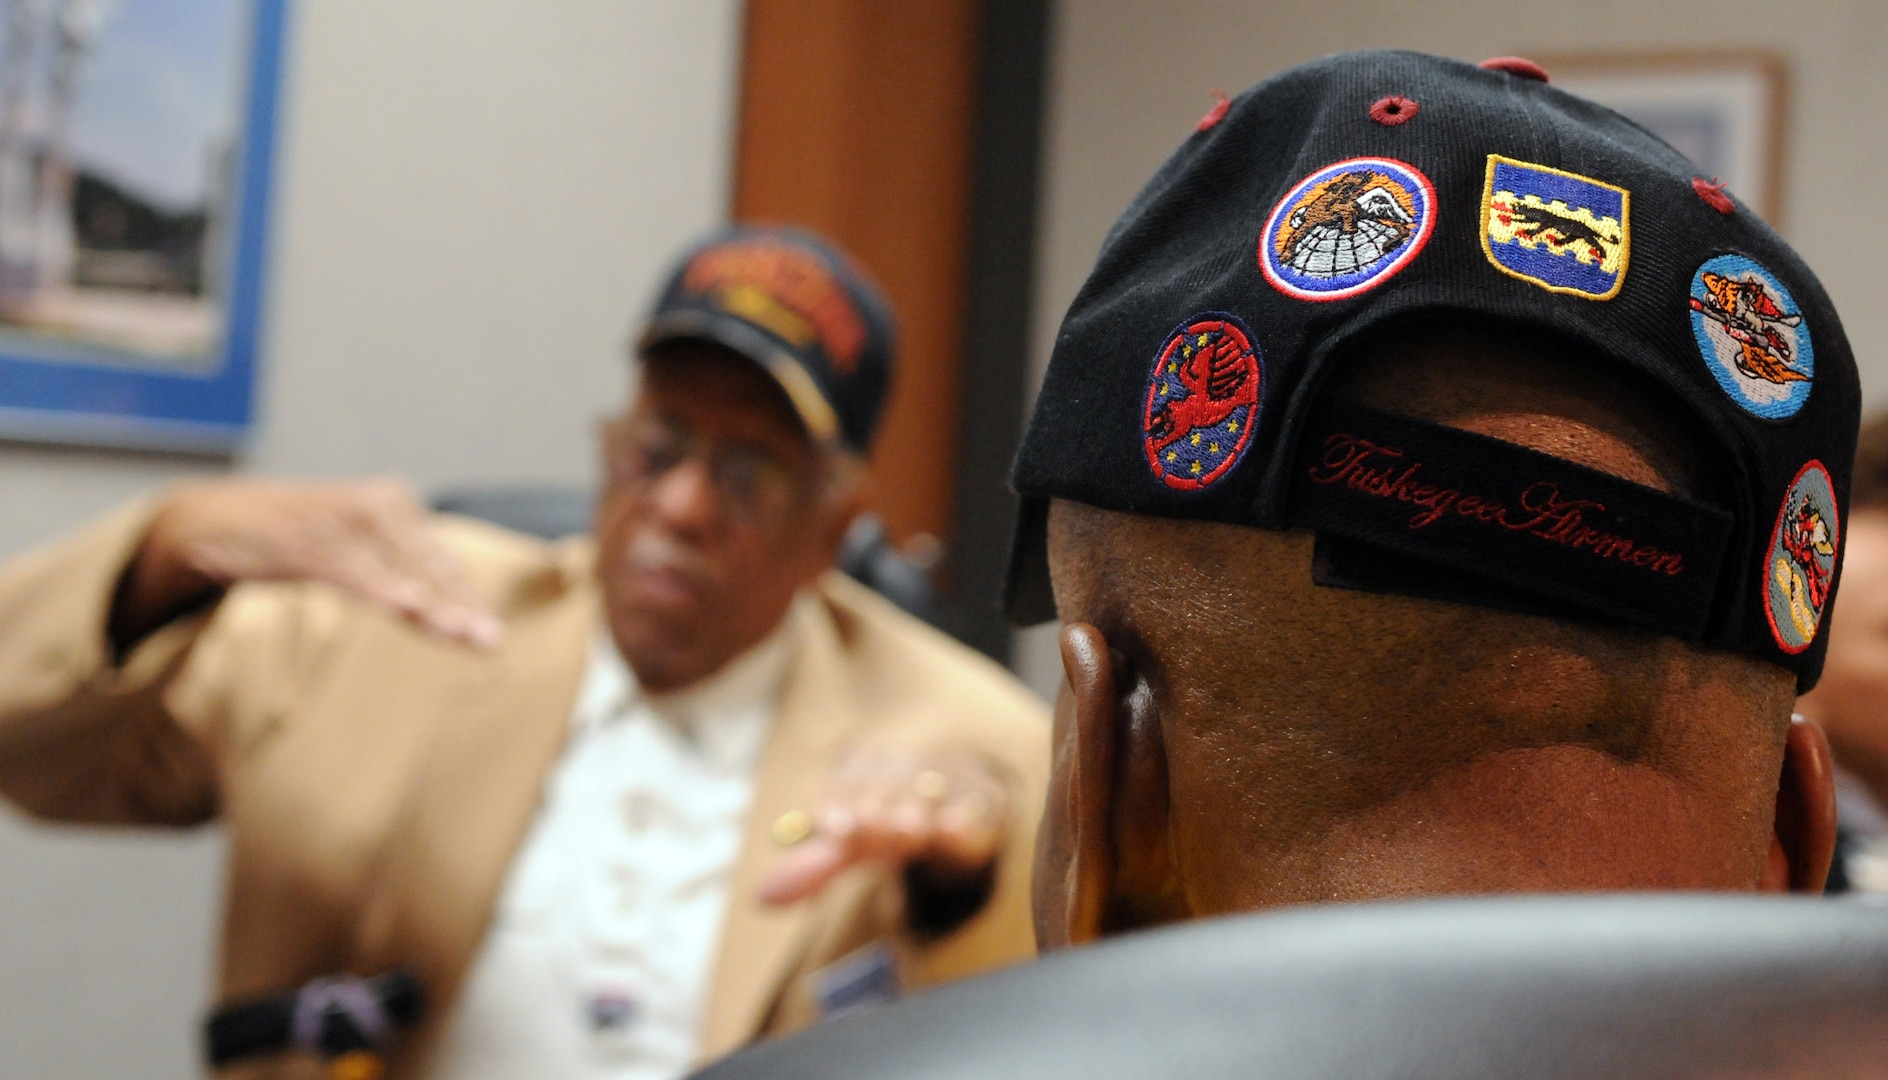 Thomas Ellis, a Tuskegee Airman administrative clerk with the 301st Fighter Squadron, speaks with other Tuskegee Airmen during the First Tuskegee Heritage Breakfast on Feb. 9 at the 99th Flying Training Squadron. Activated on March 22, 1941, the 99th FTS was originally designated as the 99th Pursuit Squadron, and was better known as the "Tuskegee Airmen," the first all-black unit in the U.S. Army Air Corps. (U.S. Air Force photo by Rich McFadden)